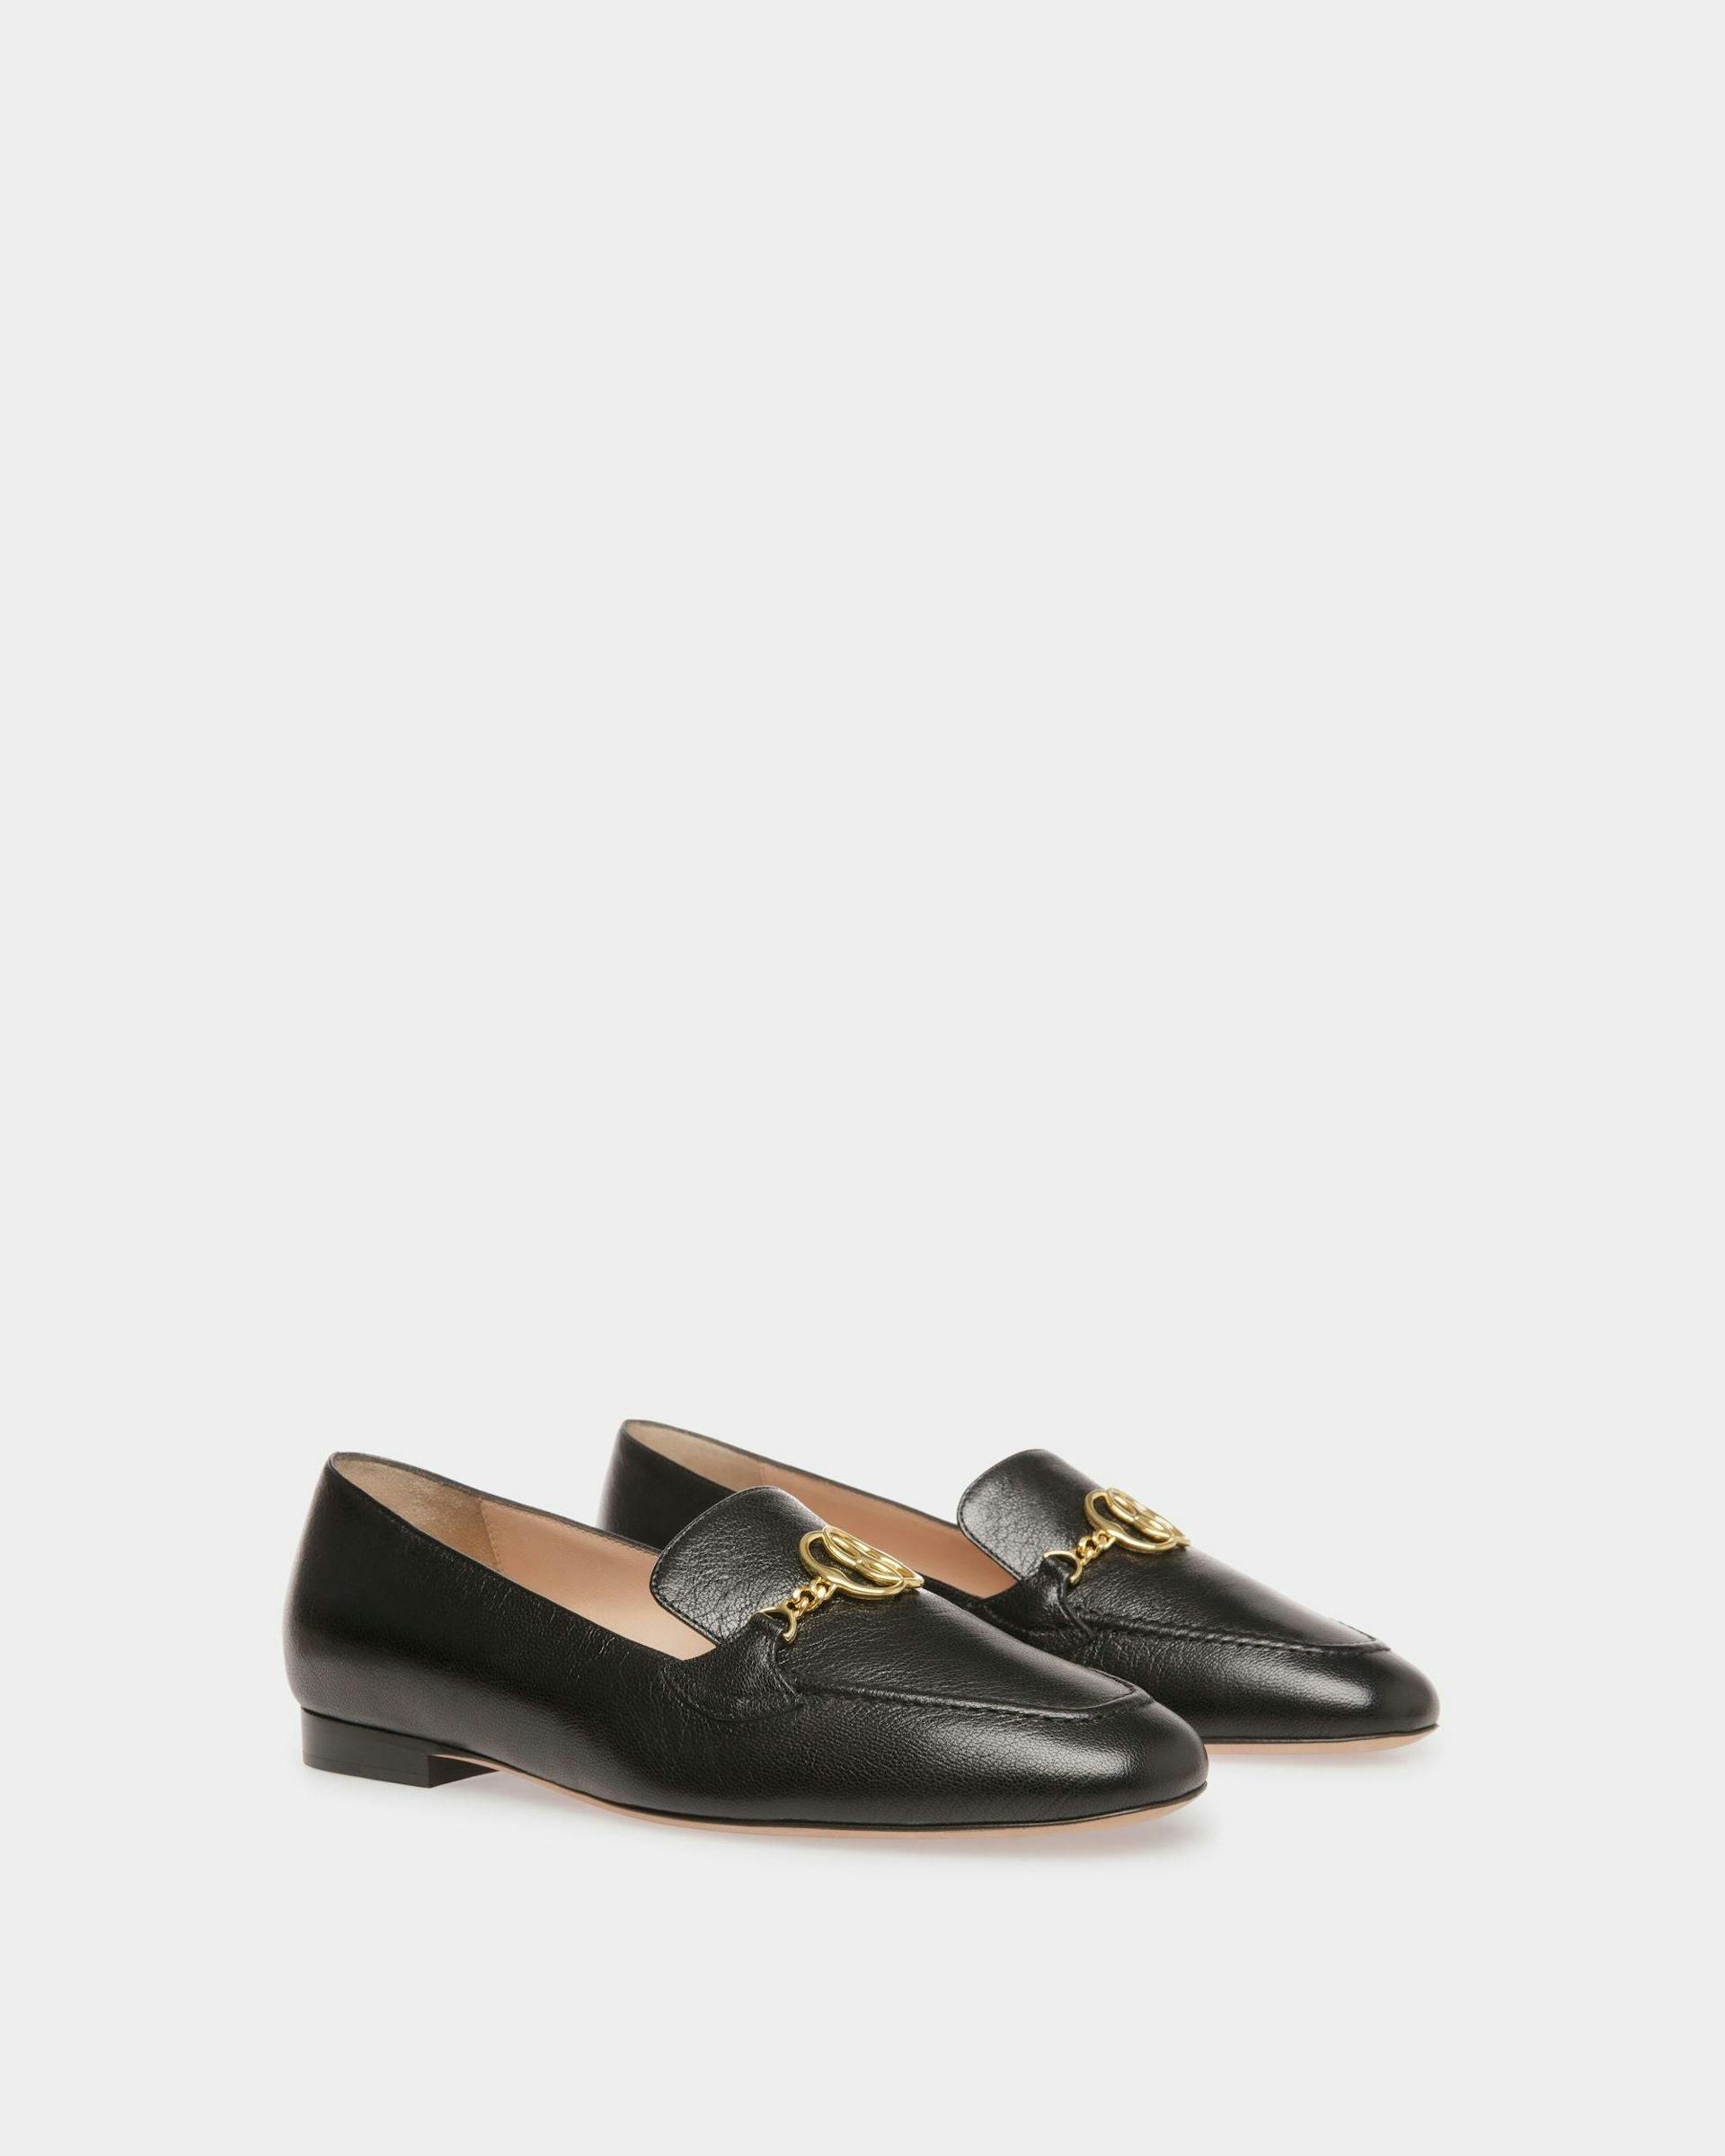 Women's Daily Emblem Loafers In Black Leather | Bally | Still Life 3/4 Front